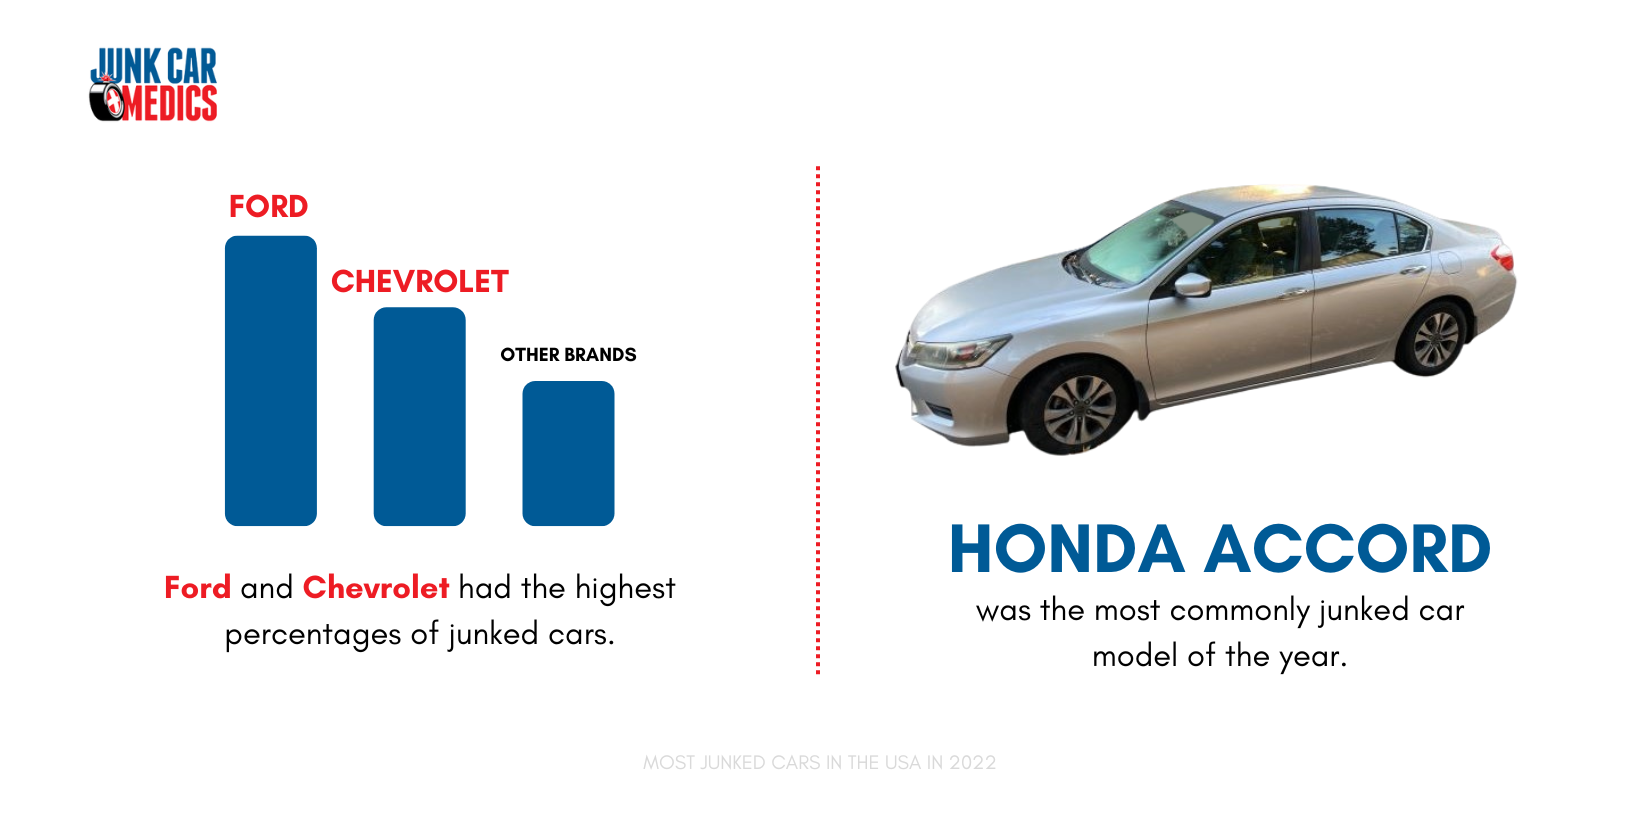 Most Commonly Junked Car Brands and Car Model: Ford, Chevrolet, and Honda Accord